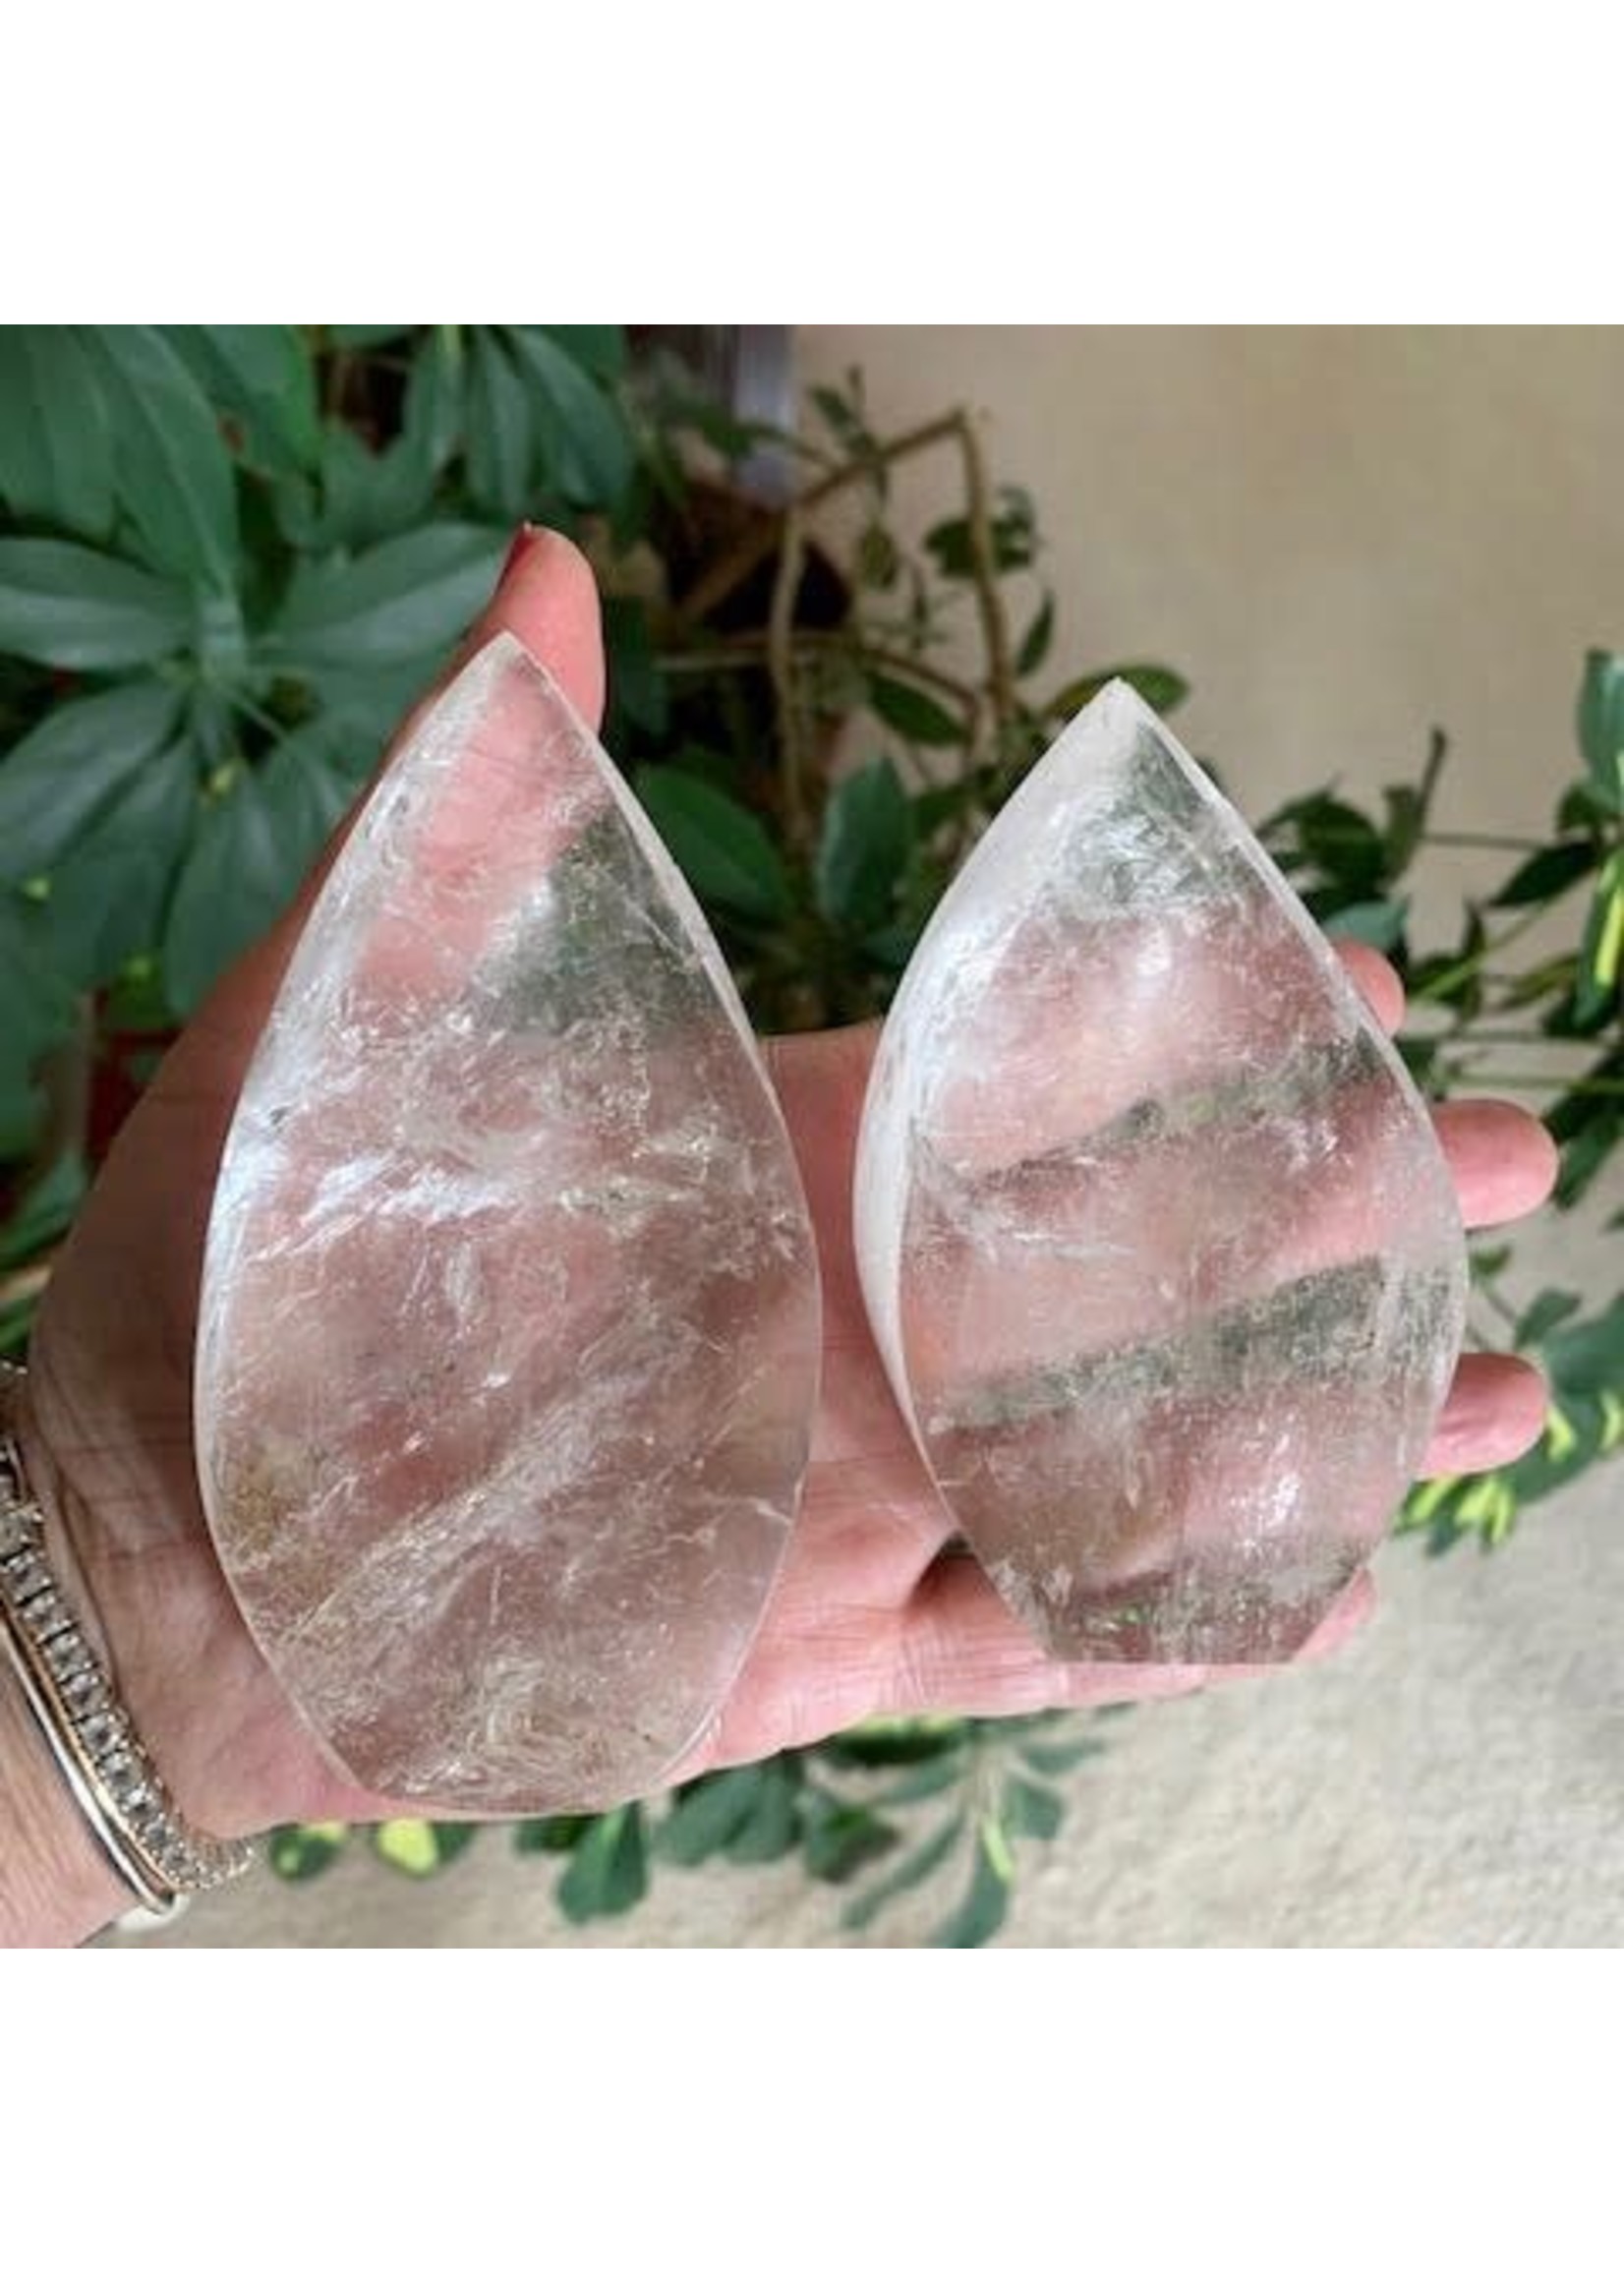 Quartz Flames for firing up your intentions